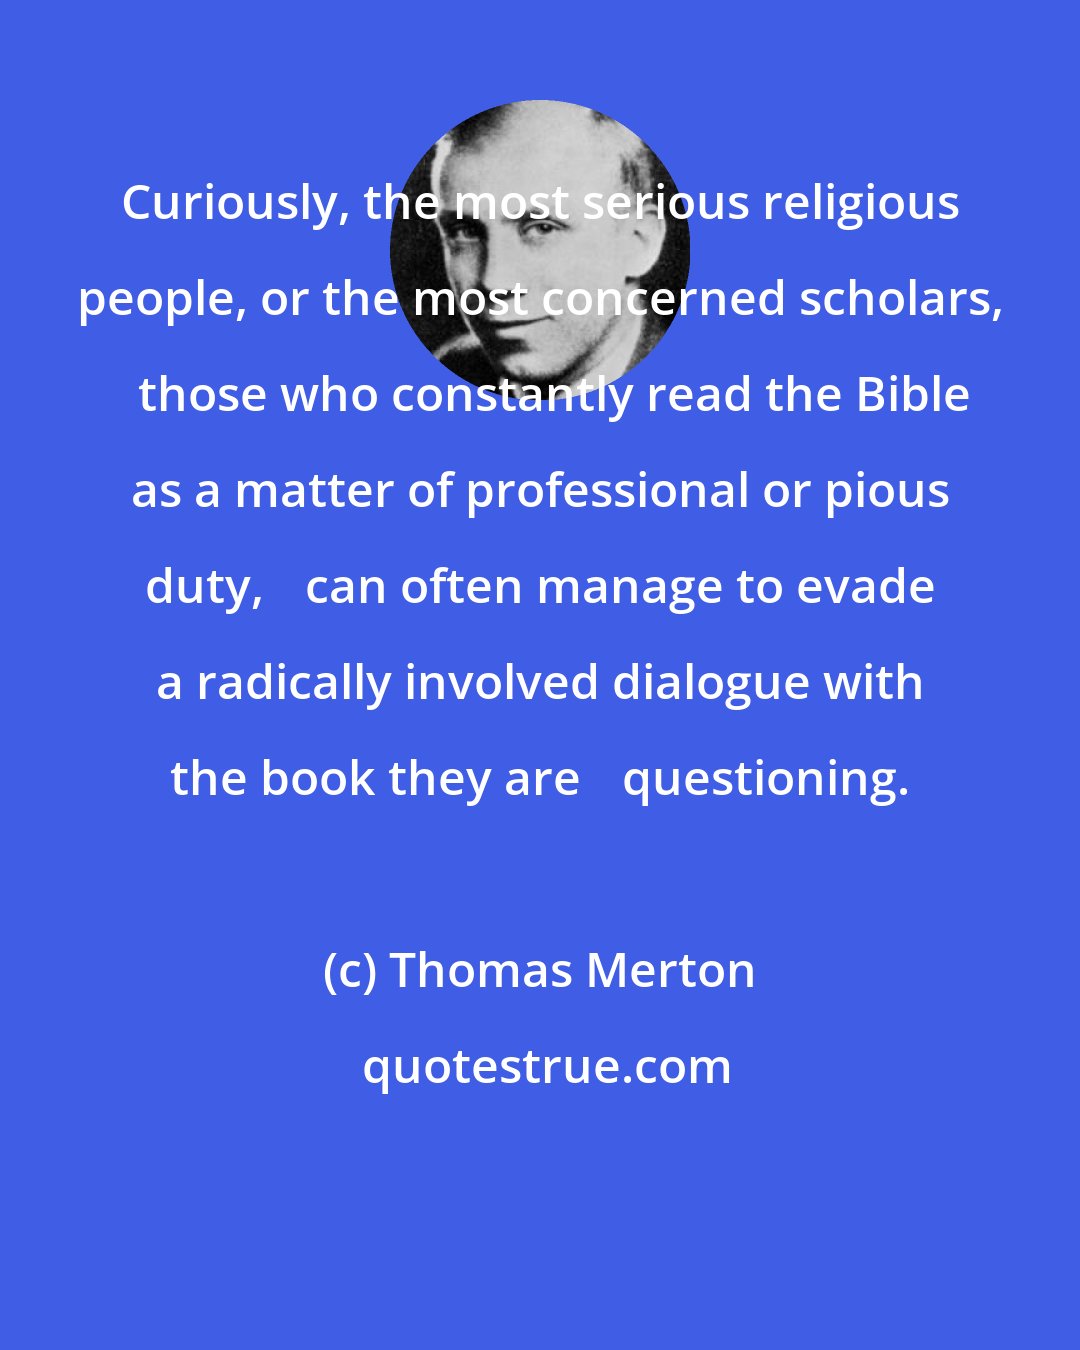 Thomas Merton: Curiously, the most serious religious people, or the most concerned scholars, 	those who constantly read the Bible as a matter of professional or pious duty, 	can often manage to evade a radically involved dialogue with the book they are 	questioning.